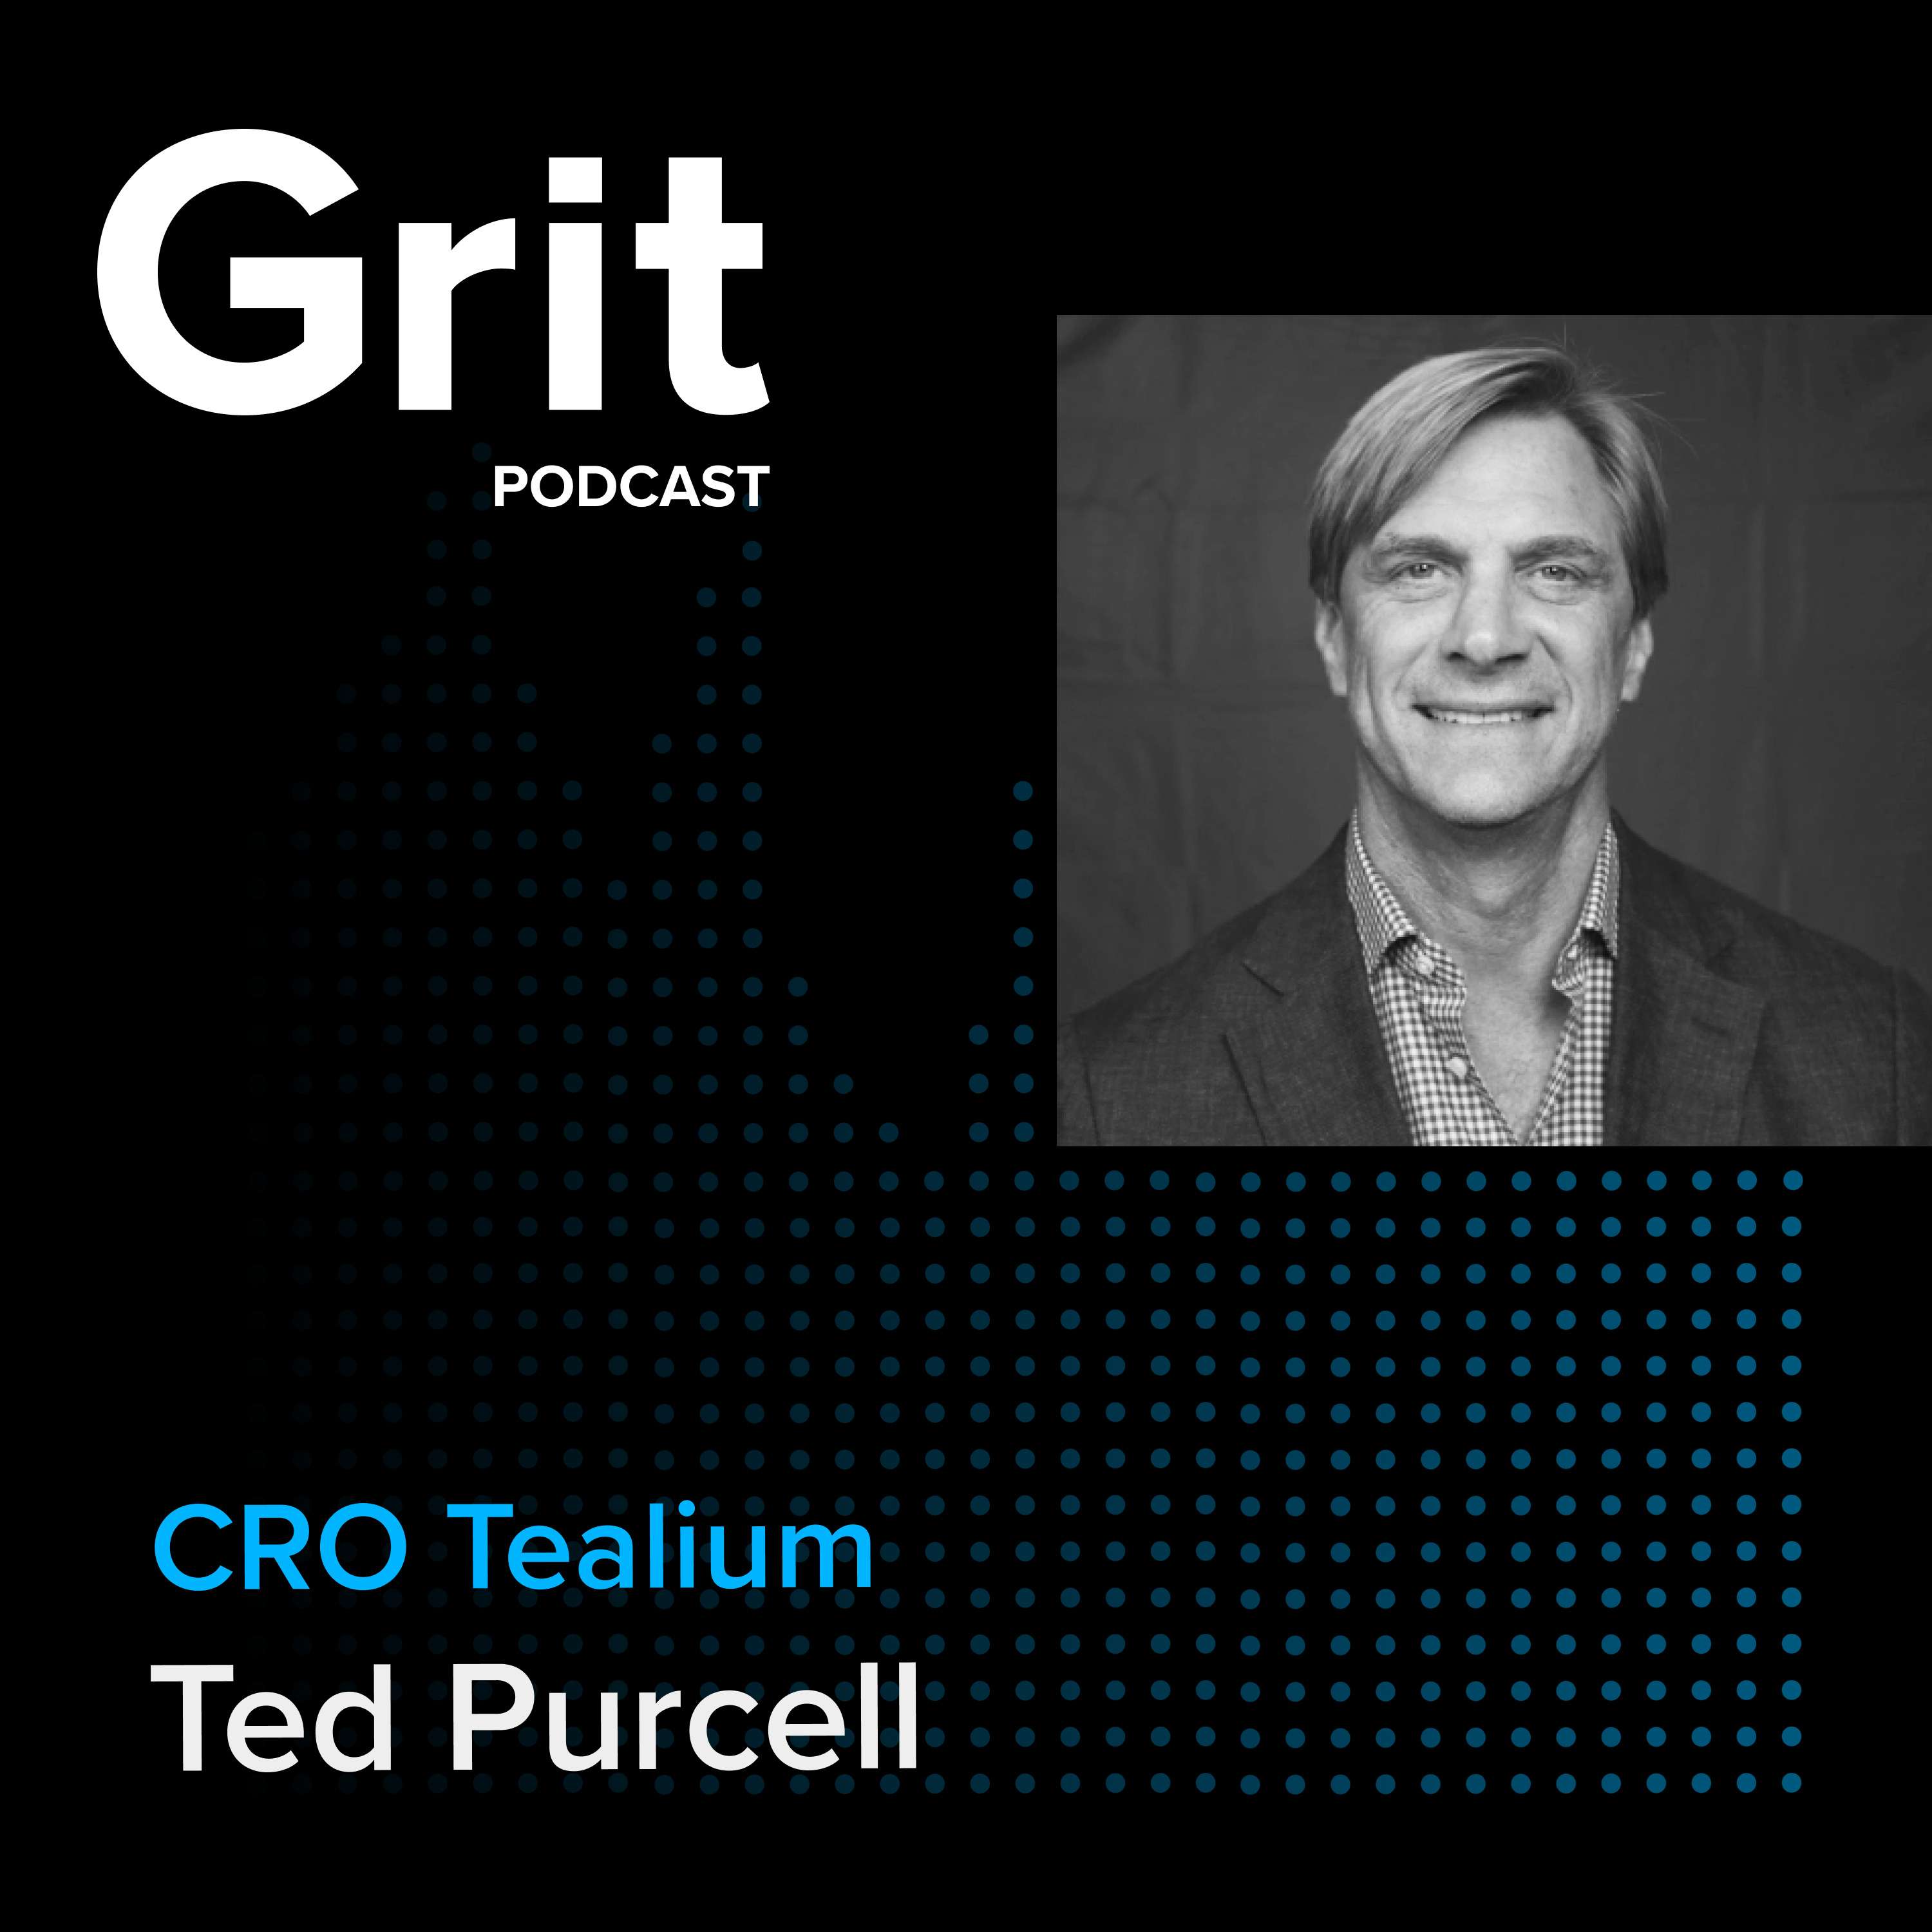 #145 CRO Tealium, Ted Purcell: Snap Into It